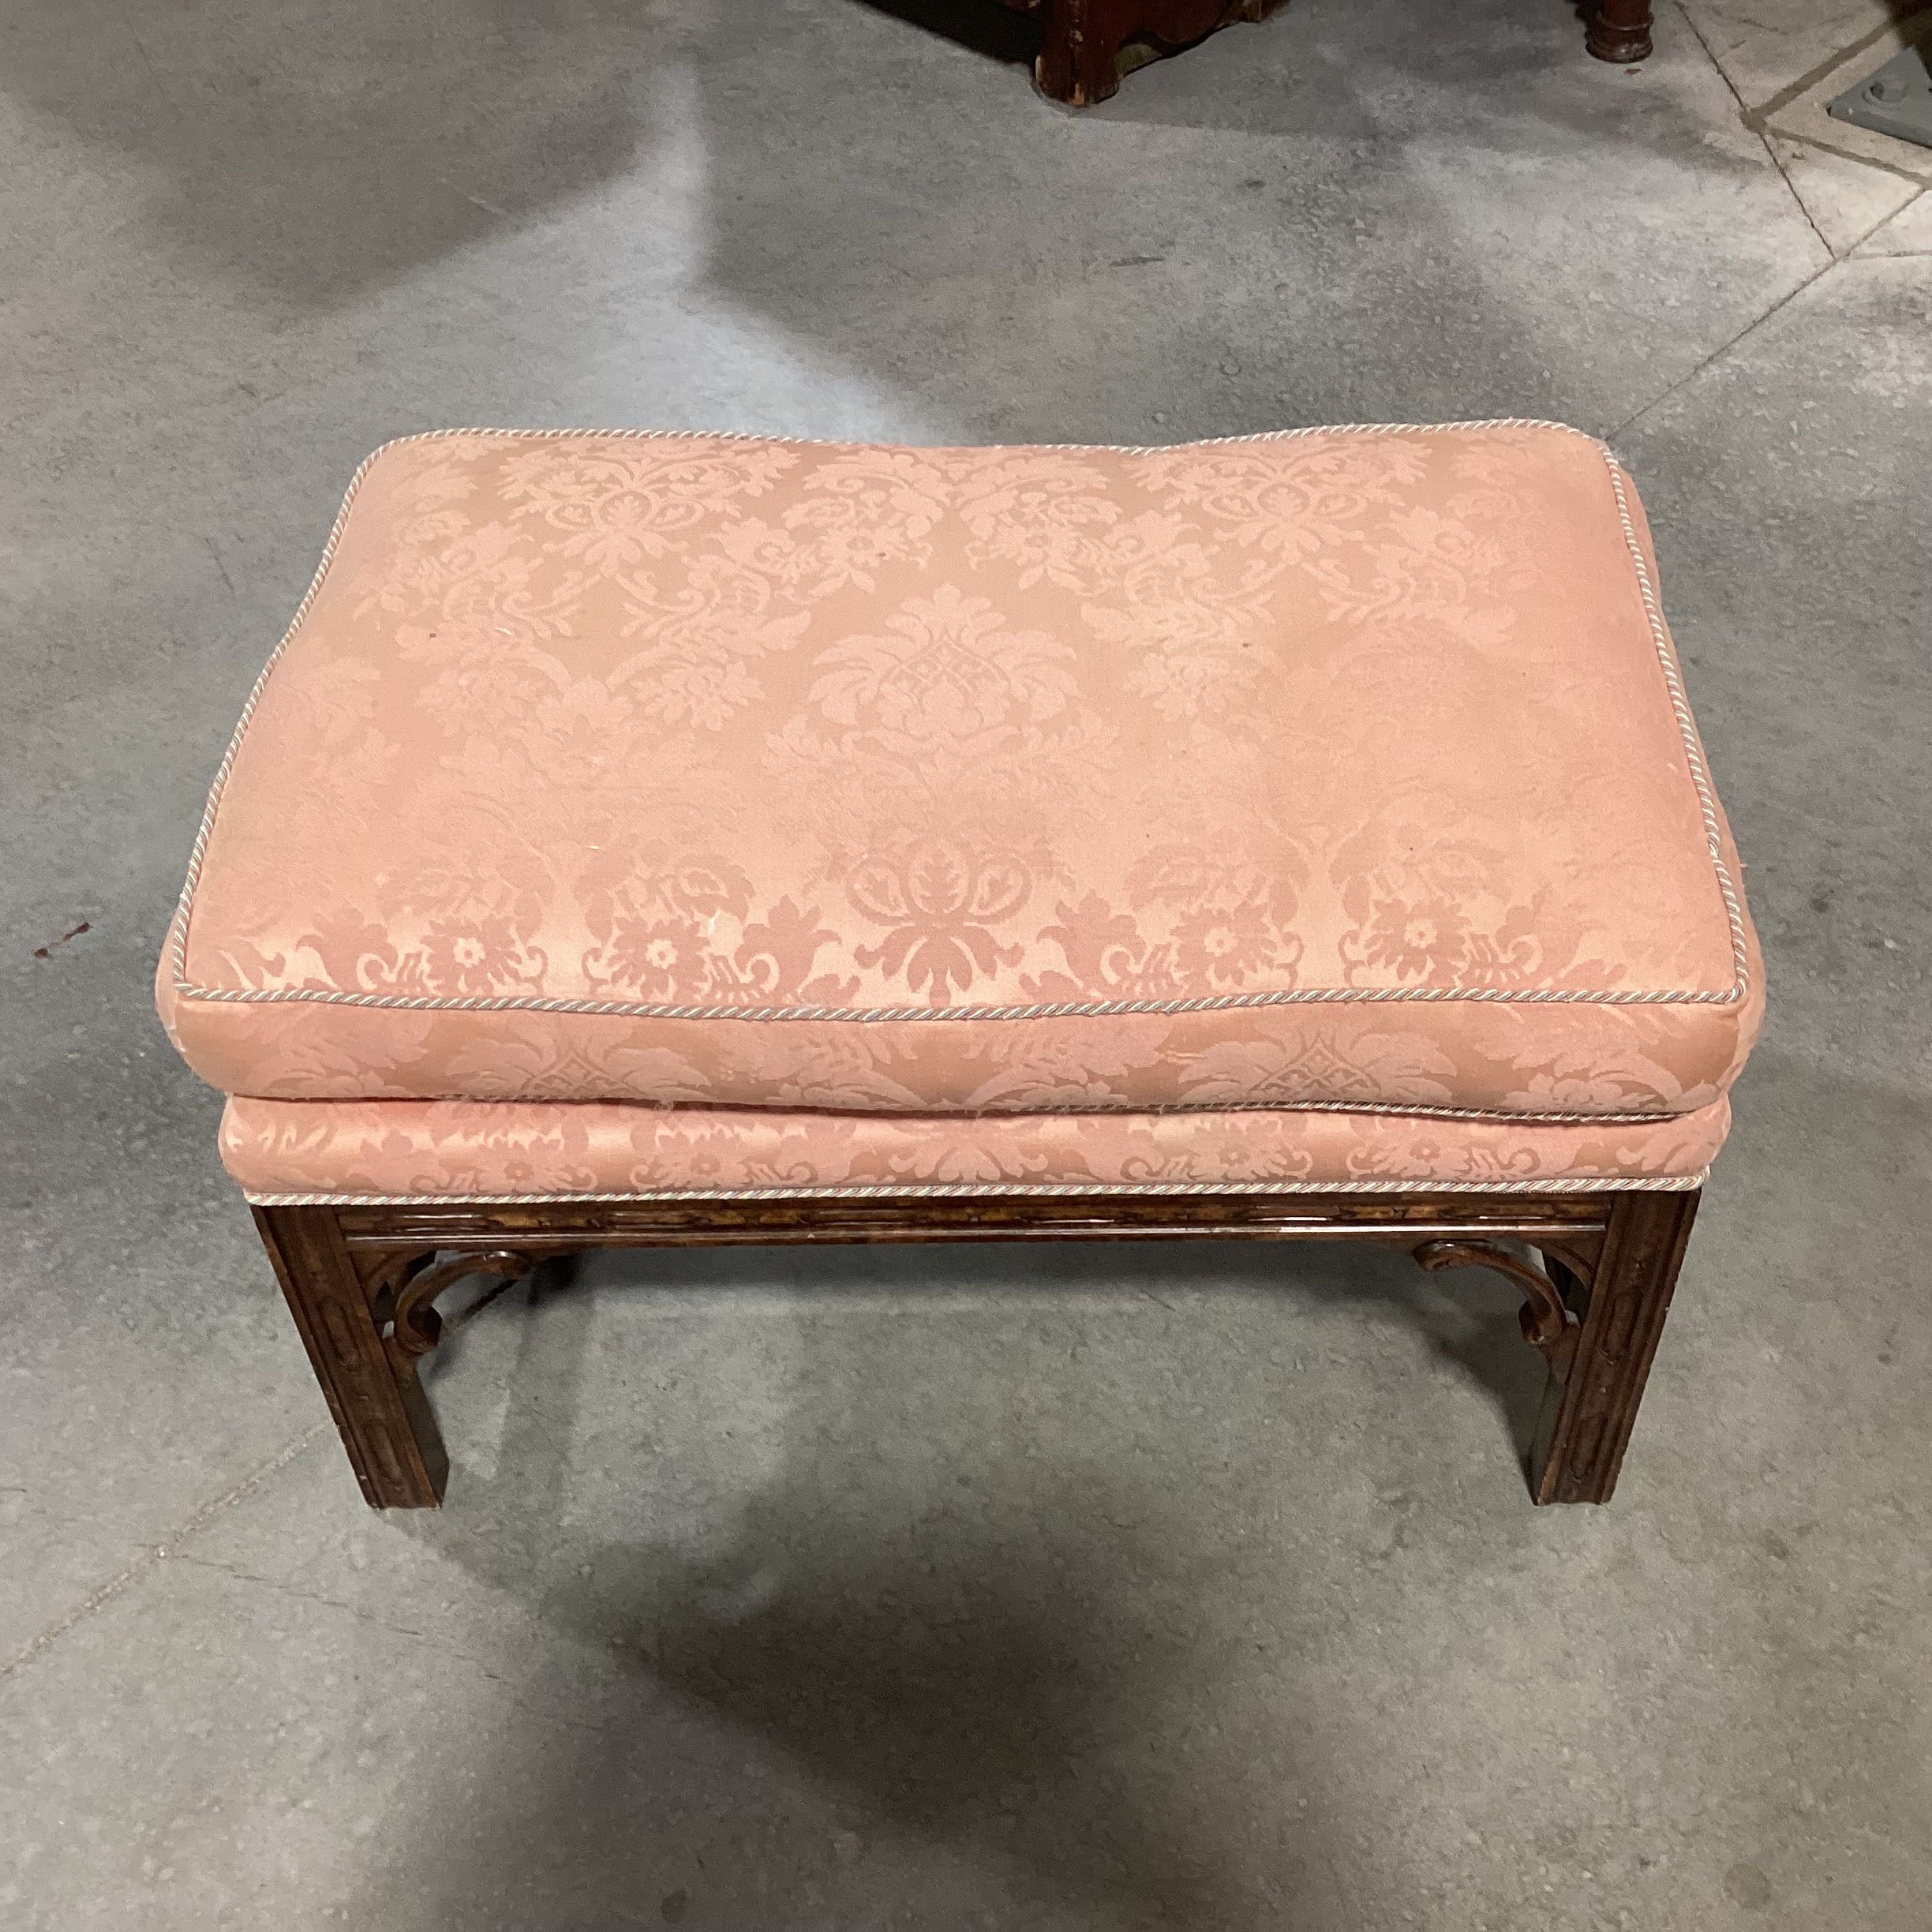 Minton Spidell Vintage Carved Wood Ornate Detail Coral Floral Satin Down with Ottoman Chair